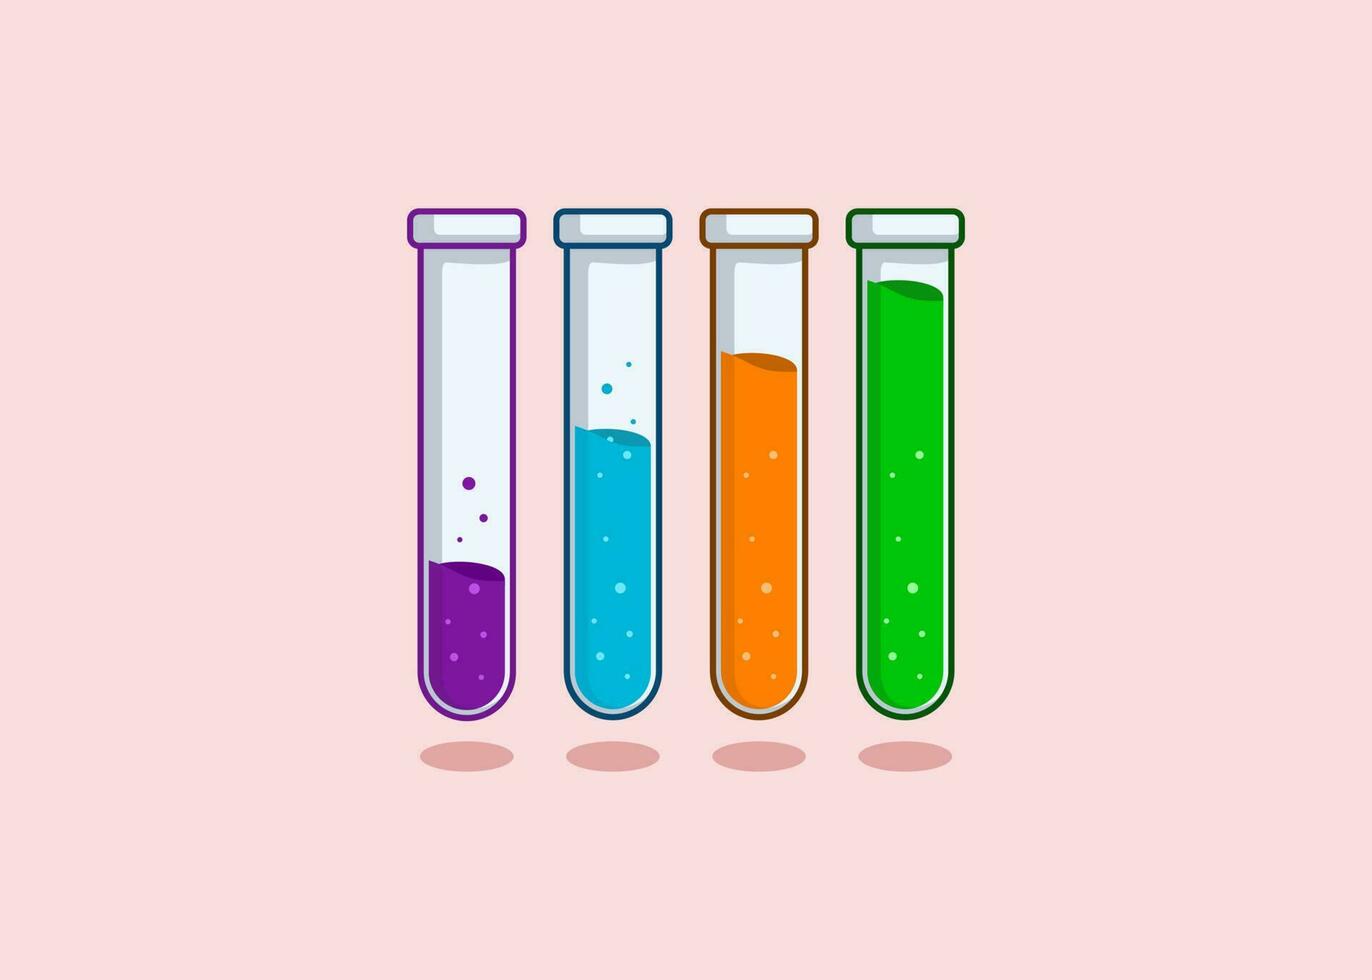 Test tube illustration in different colors vector